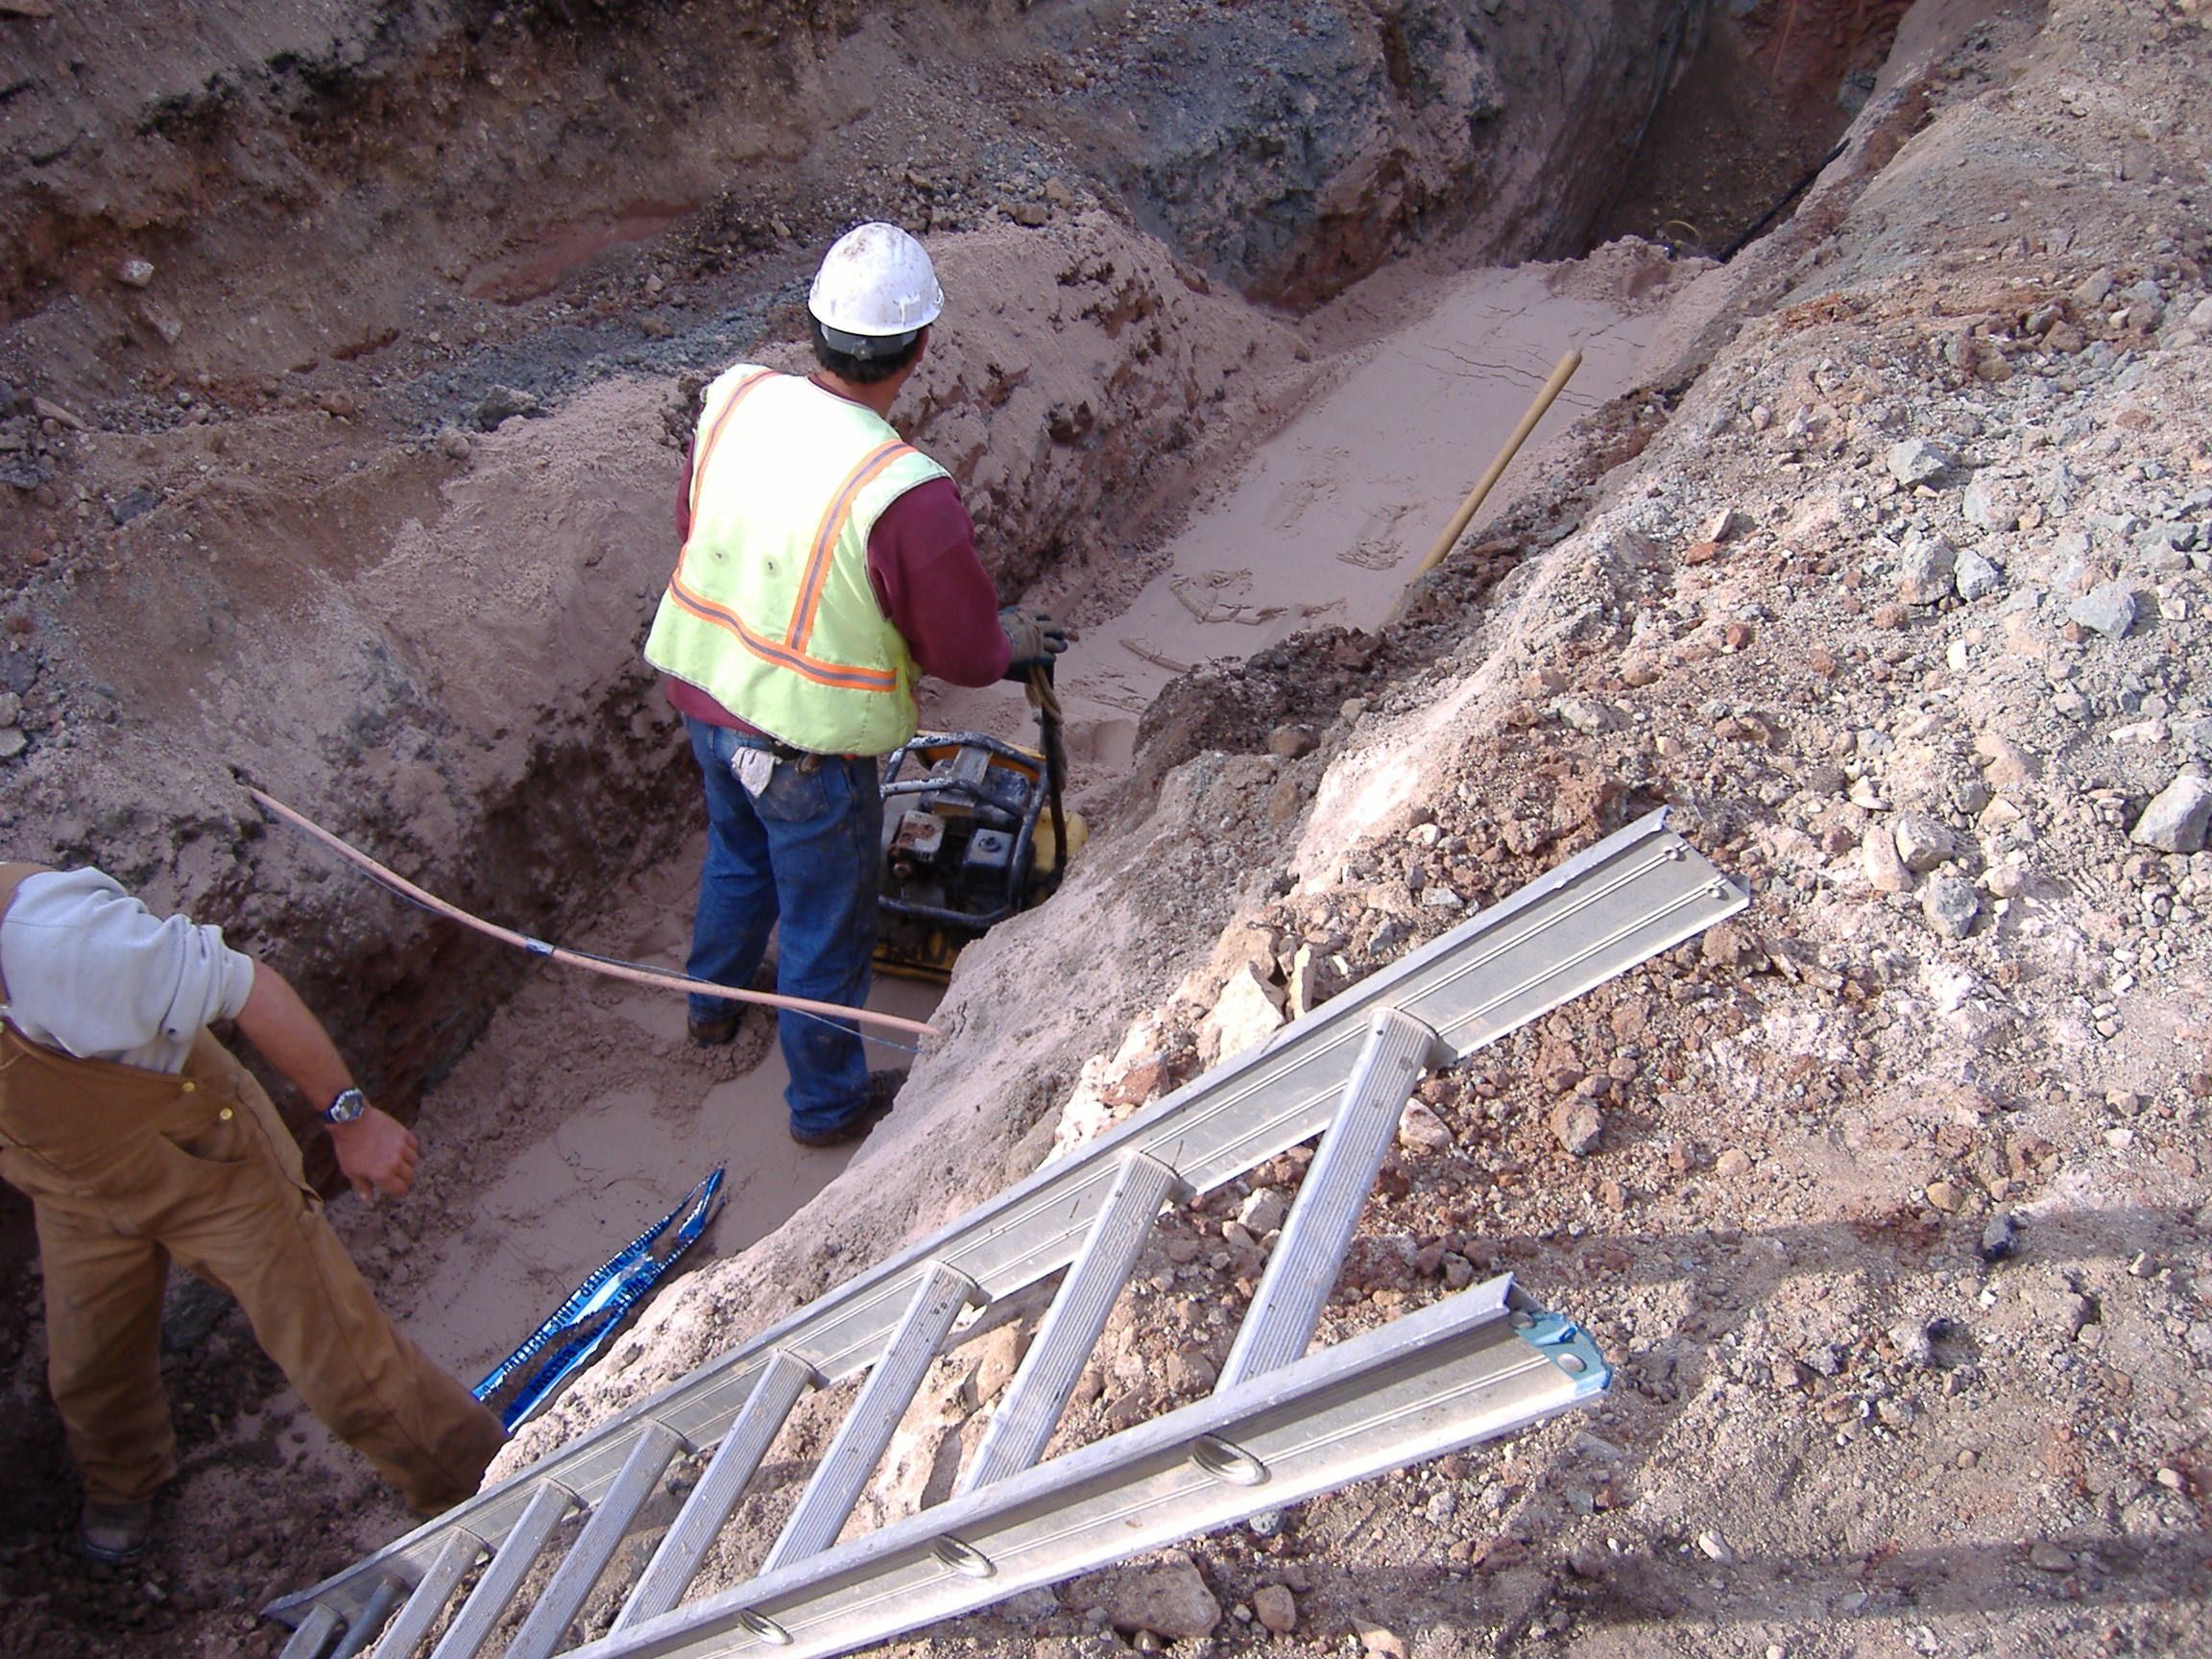 Maverick Construction Inc. excavation contractor builder water and sewer Northern Michigan